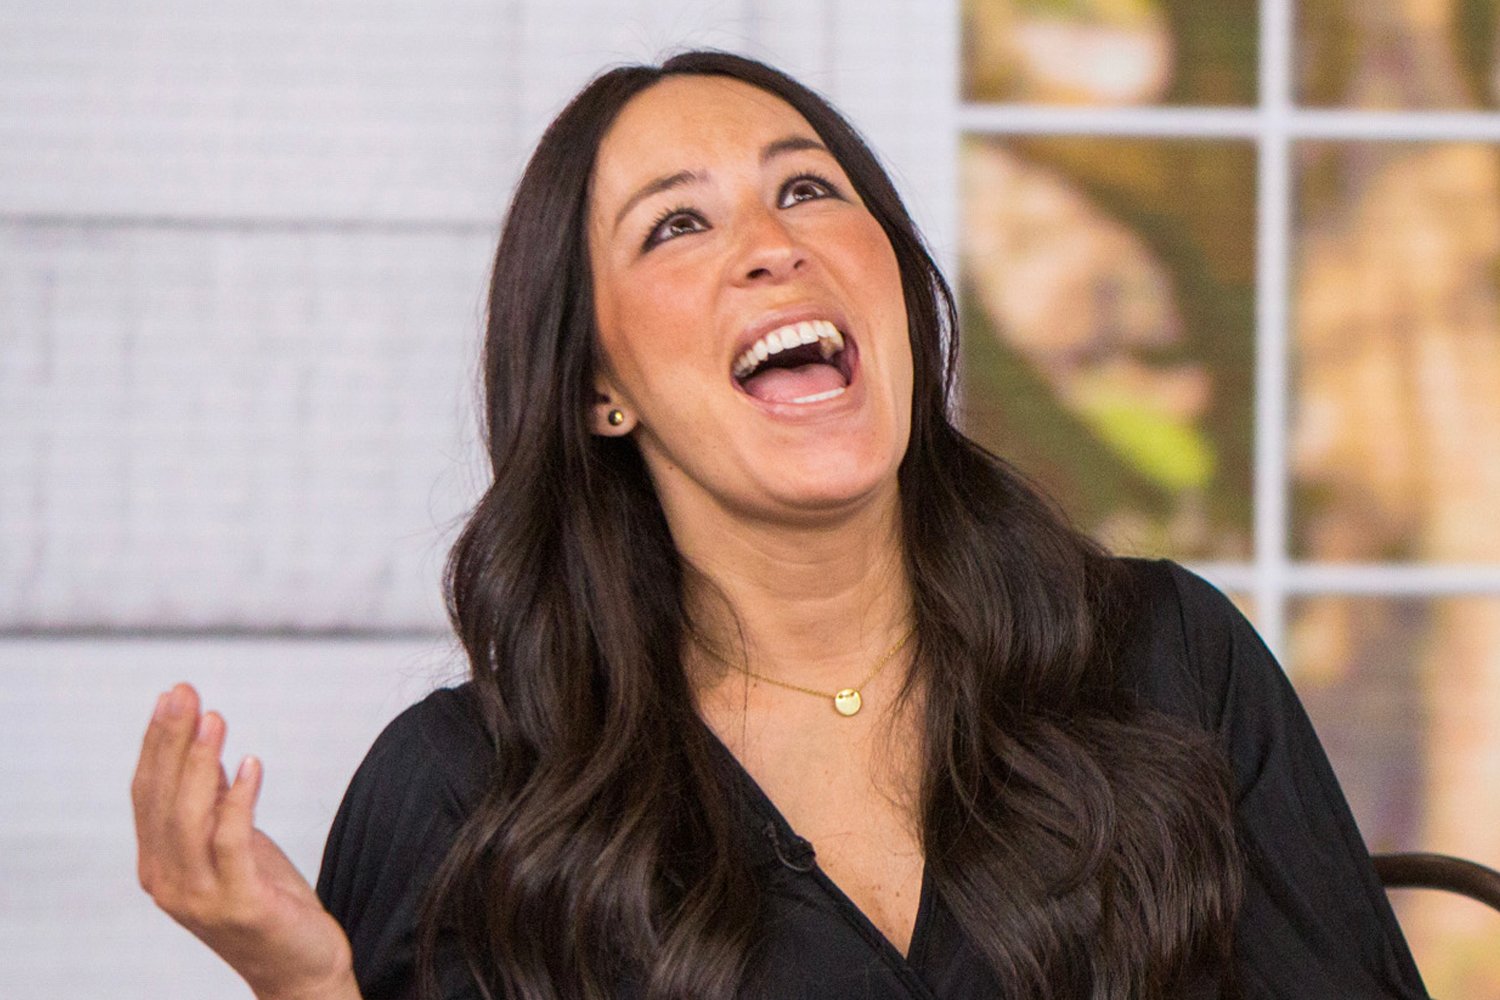 Joanna Gaines looking excited